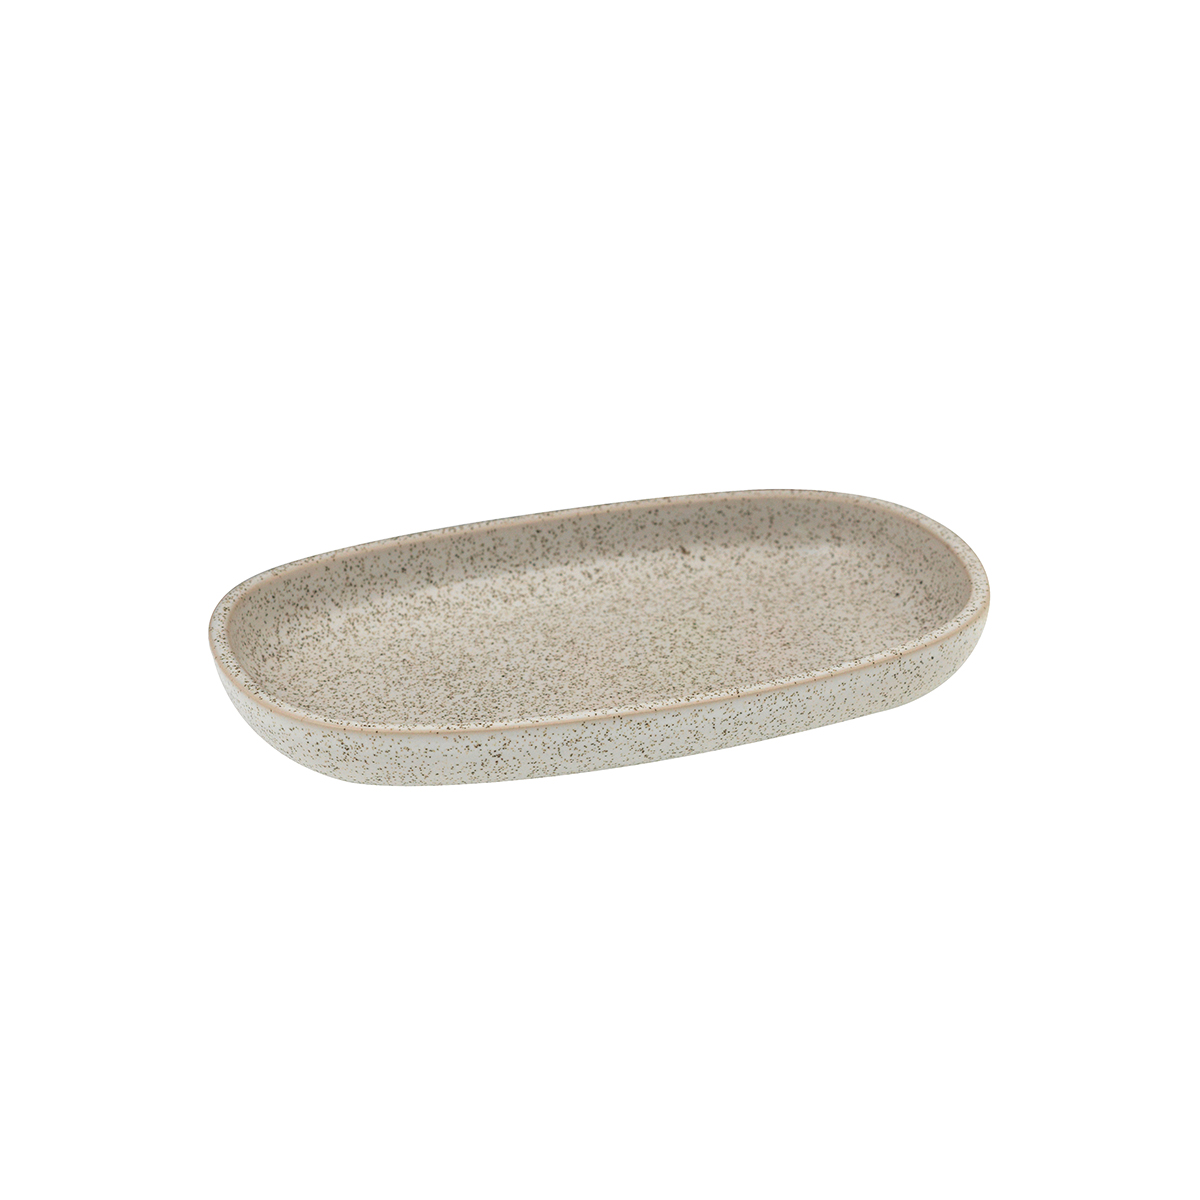 EASE CLAY DEEP OVAL PLATE